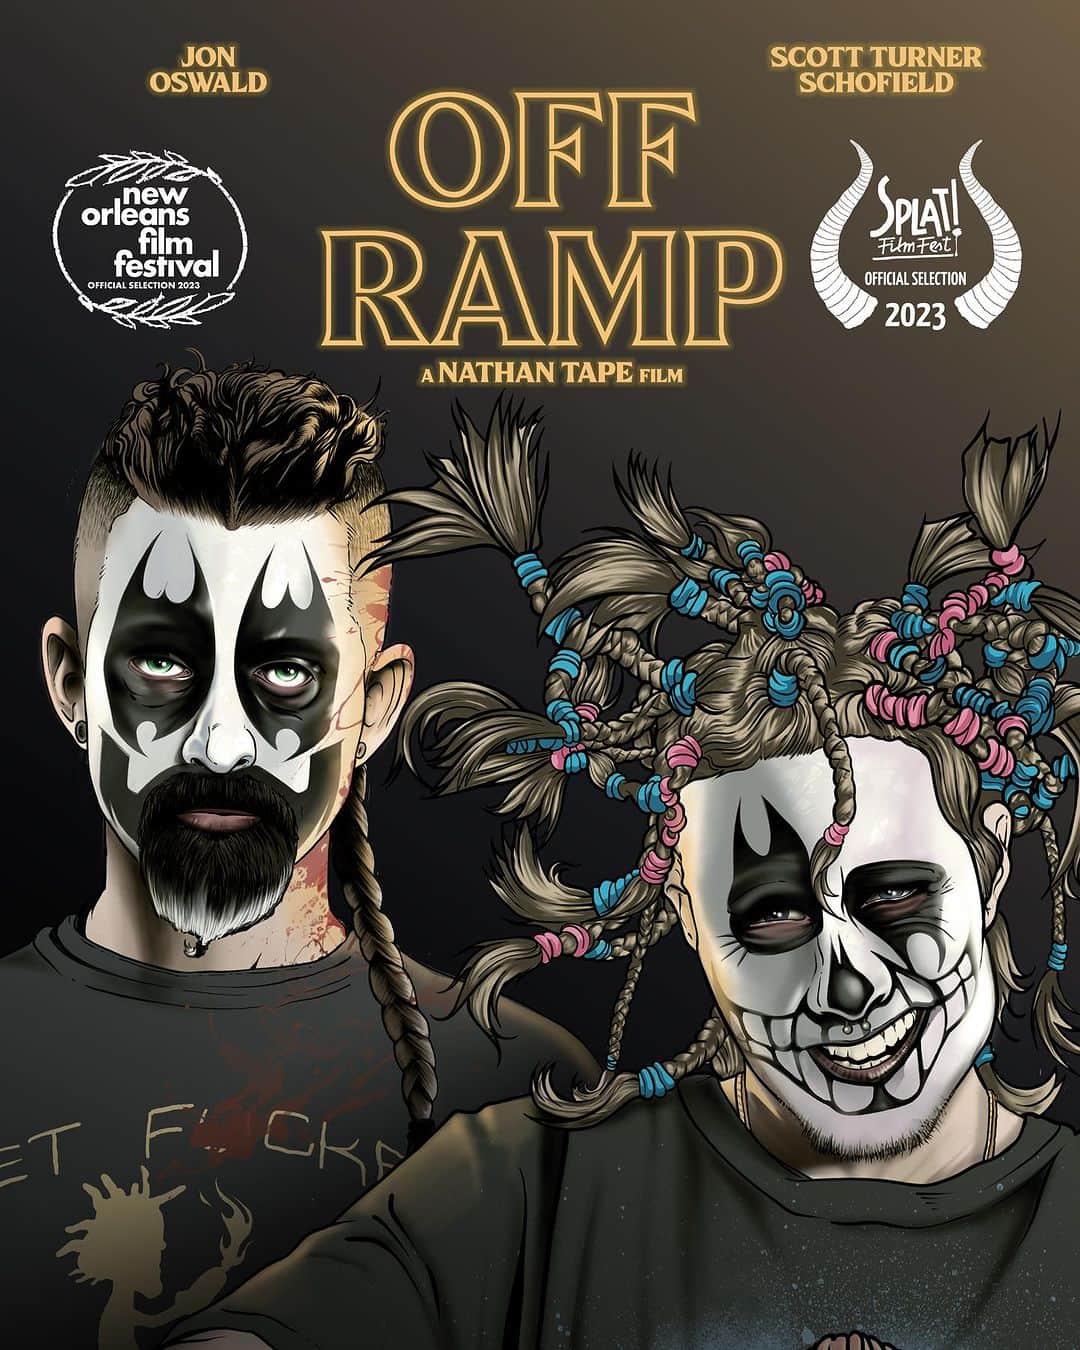 Ashley Smithさんのインスタグラム写真 - (Ashley SmithInstagram)「Yay I can finally talk about  @offrampfilm because we just got our #sagaftrainterimagreement ⭐️ y’all this unhinged, full of love, full of laughs story of two juggalos on their way to the gathering, is finally having its WORLD PREMIERE! 🌎🍿 ~Oct. 28th Poland @splatfilmfest  And then ~ US premier Nov.4th  @neworleansfilmfestival Saturday night 👏🏼👏🏼👏🏼  I grew up in East Texas hanging with Juggalos as a teenager. I was “Down with the clown” as they say. The thing that stood out the most to me amongst the Juggalos was the LOVE, the sense of Family, and of course the FAYGO showers. There’s something so primal about painting one’s face and letting soda rain down from the sky as you bounce to wicked rhymes with your people. The feeling will forever be burned into my memory. So I’m Honored to be able to play Eden in this twisted story of finding love and acceptance in this messed up world.   @damnathan @tim_cairo @bronmoyi @jonnieozz @turnerschofield @therealashsmith @thereeddiamond @miles_doleac @mr_bankens @emmatrancesgrantham @theoduscrane @nedyousef @rhondajohnsondents @thelauracayouette @jeremylondonactor @kateadair_official @fabiolandrade @toora.loora.laura @13friends @dimitrinzerem @attaboiwuzhere @kurttape @tapebarbara @princeable_photography @_chris.wickline_@aidandykes @pile.a.aila @andrew_m_deritter @apexpostproduction @kyotocolor @blaze_heru @no.ell.dominick @tmlaproos @brandonny33 @rickgnelson @jenikakolacz @meg_makeupfx @hsalvaggio @kingbouton @clayton_n_ji @dubdoodle @onthehuntcasting @larrytape @kataleaford @thedimarcopolo @miss.sandyparker @cuppajoe504 @scarboroughdane @warrentape @katenhofstetter @elise.tate @amywaksmonski @nitrotheflash @savantcarlos @virg. _of_ tears @alex_kissel @kennedyremotes @majic_sean @evan_eastham @ooooooowen @joebrandtmedia @roansmithdesigns @theinkwellpress @flo_resolution @jimmythehairguy @realmankini @faygoluversheaven @rageedyann」10月11日 11時49分 - therealashsmith